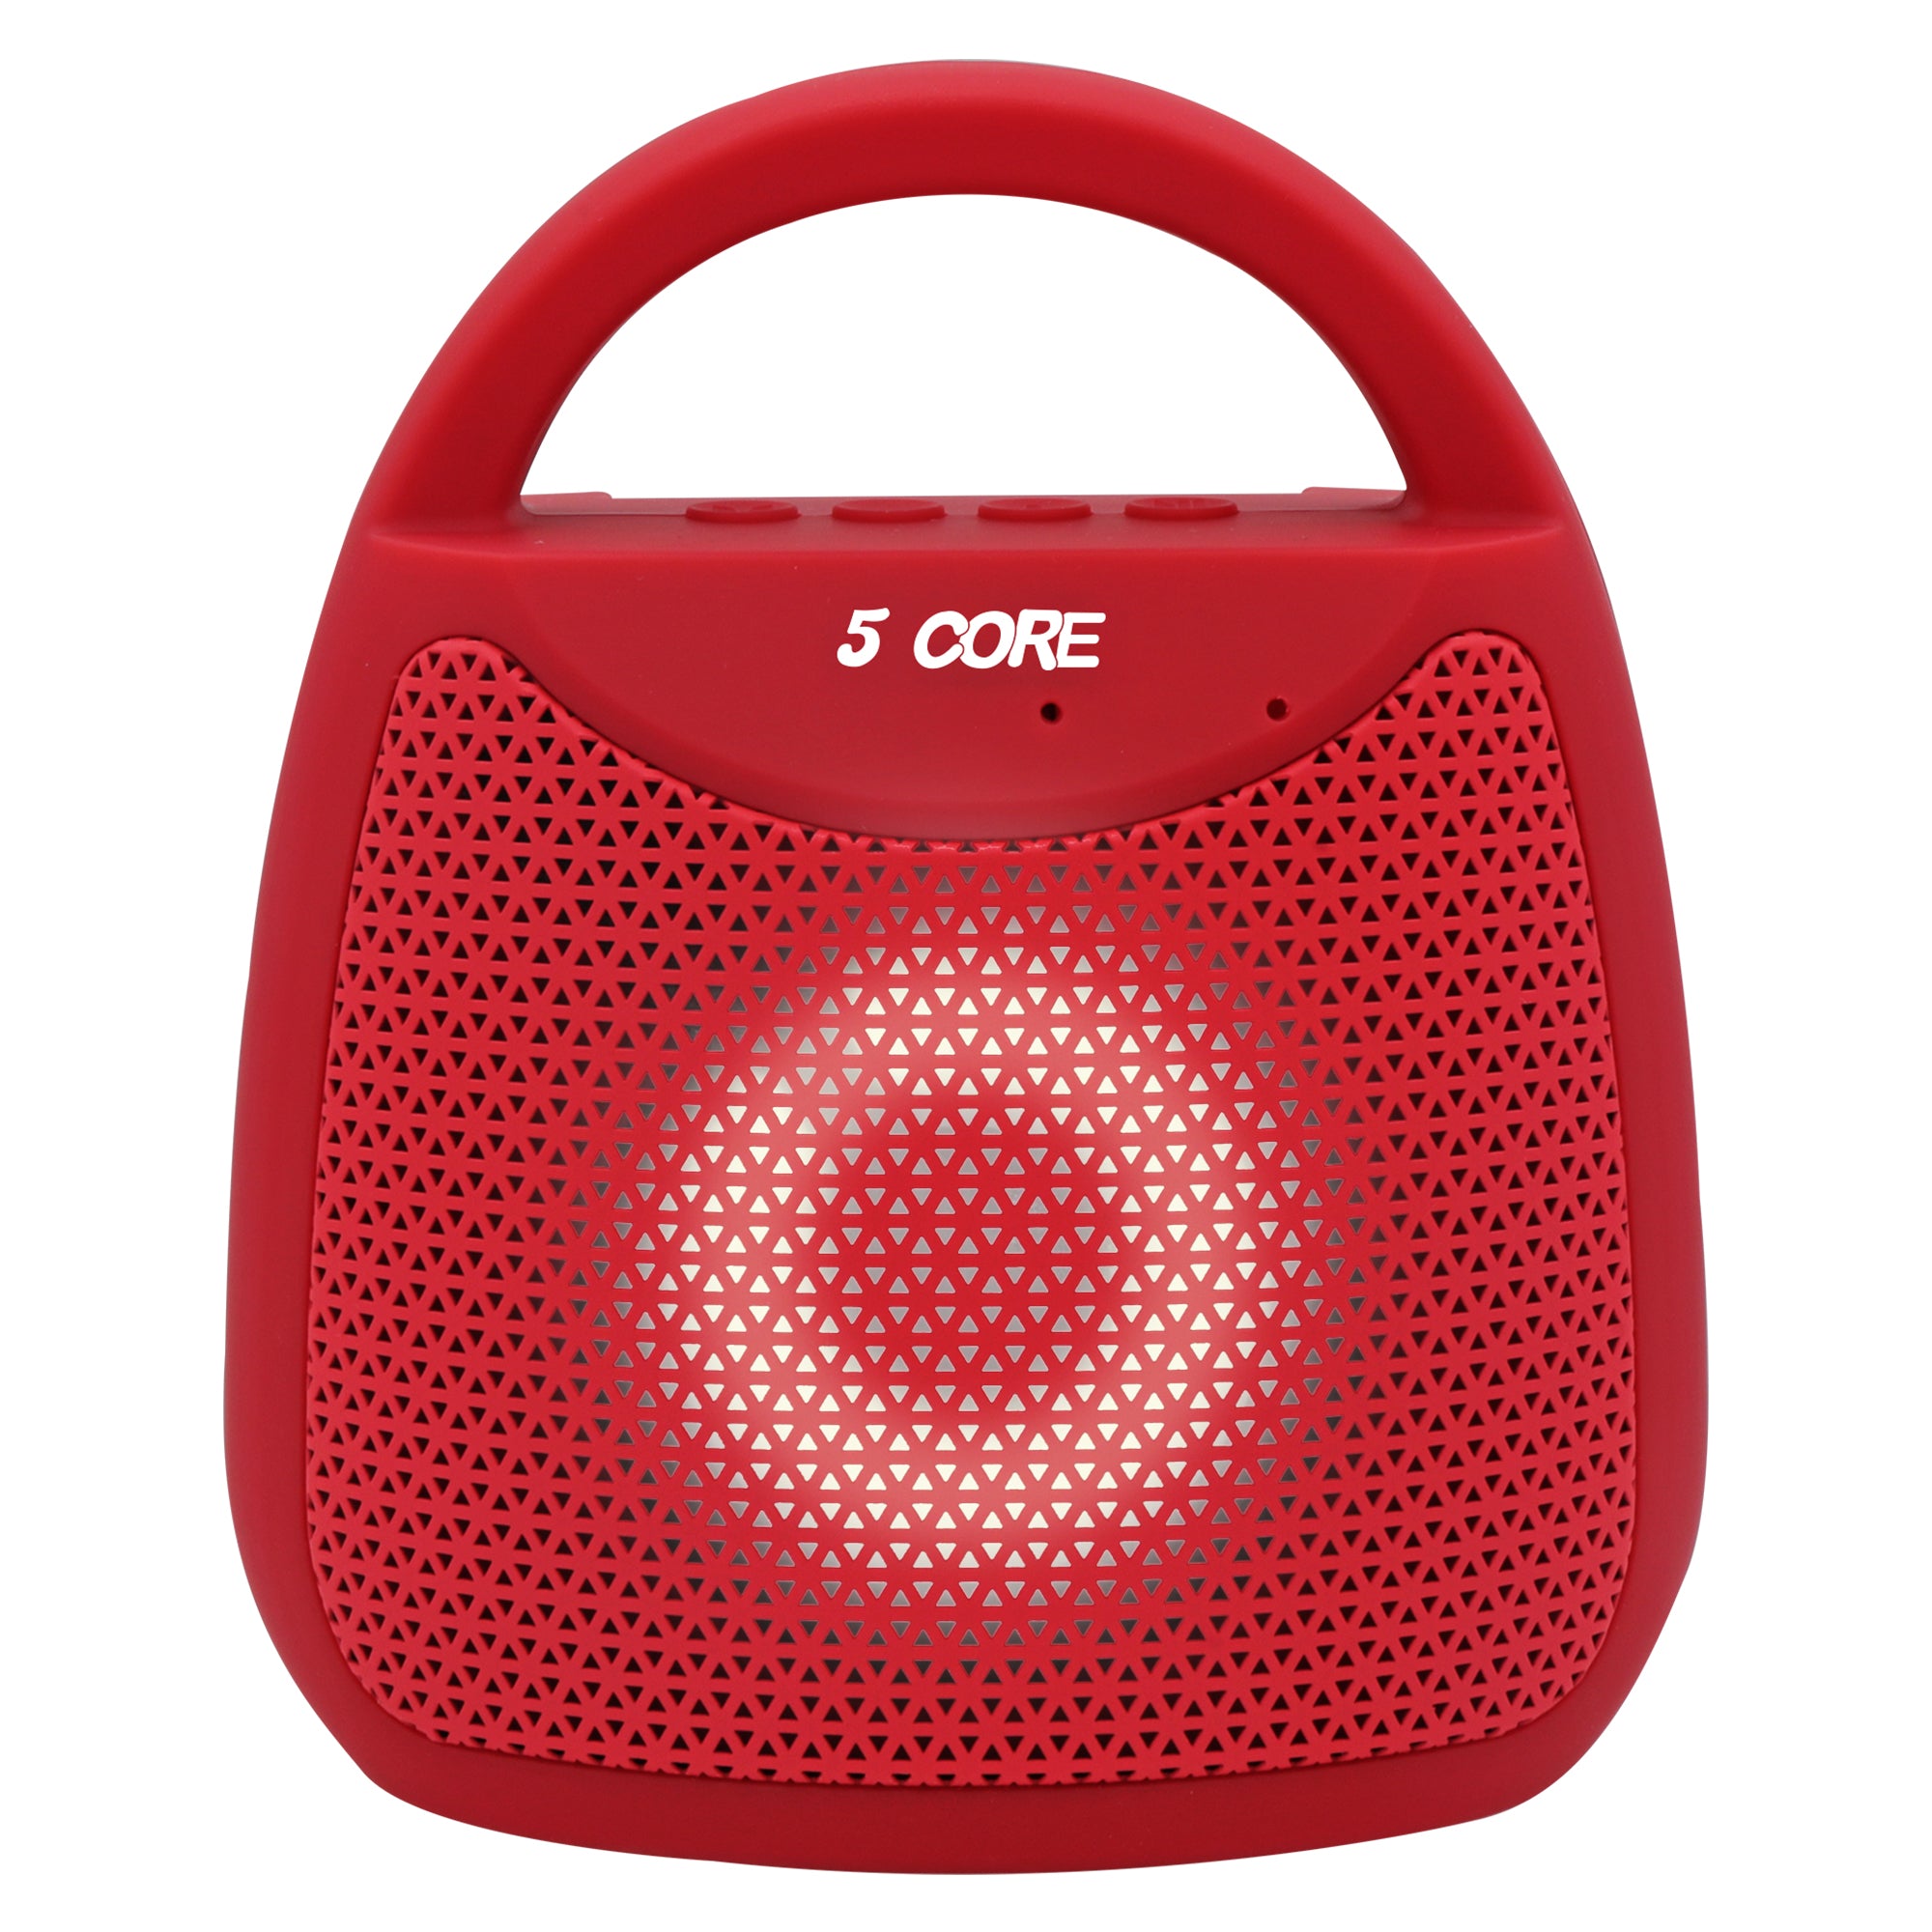 5 Core Bluetooth Speaker Rechargeable Portable Speakers Mini Water Resistant Stereo Sound 4 Hours Play Time for iPhone Samsung Android -BLUETOOTH-13R